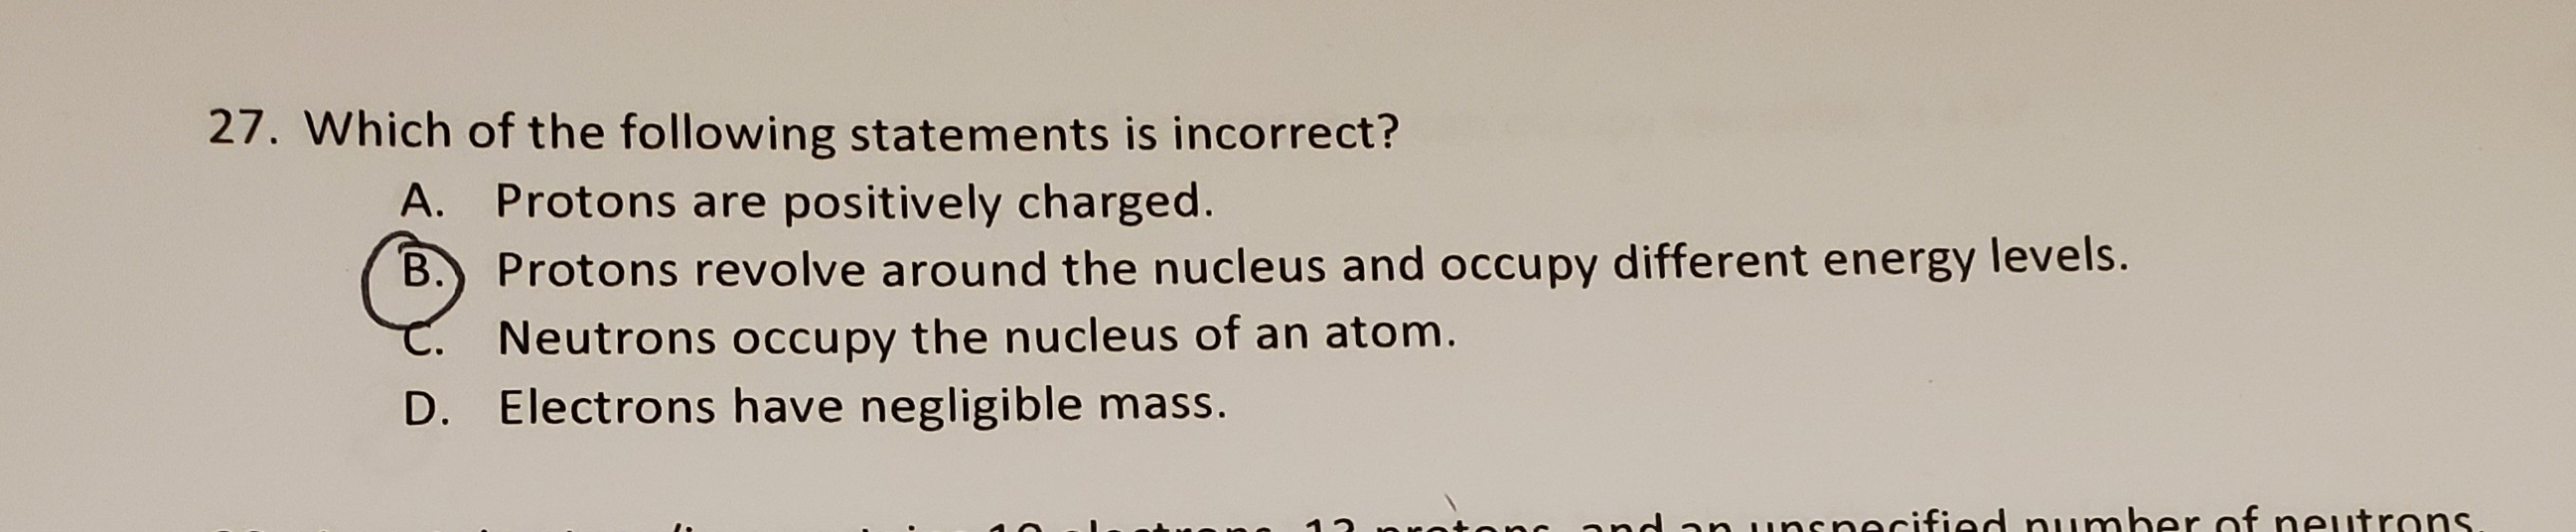 Which of the following statements is incorrect?
A. Protons are positively charged.
B.) Protons revolve around the nucleus and occupy different energy levels.
Neutrons occupy the nucleus of an atom.
D. Electrons have negligible mass.
